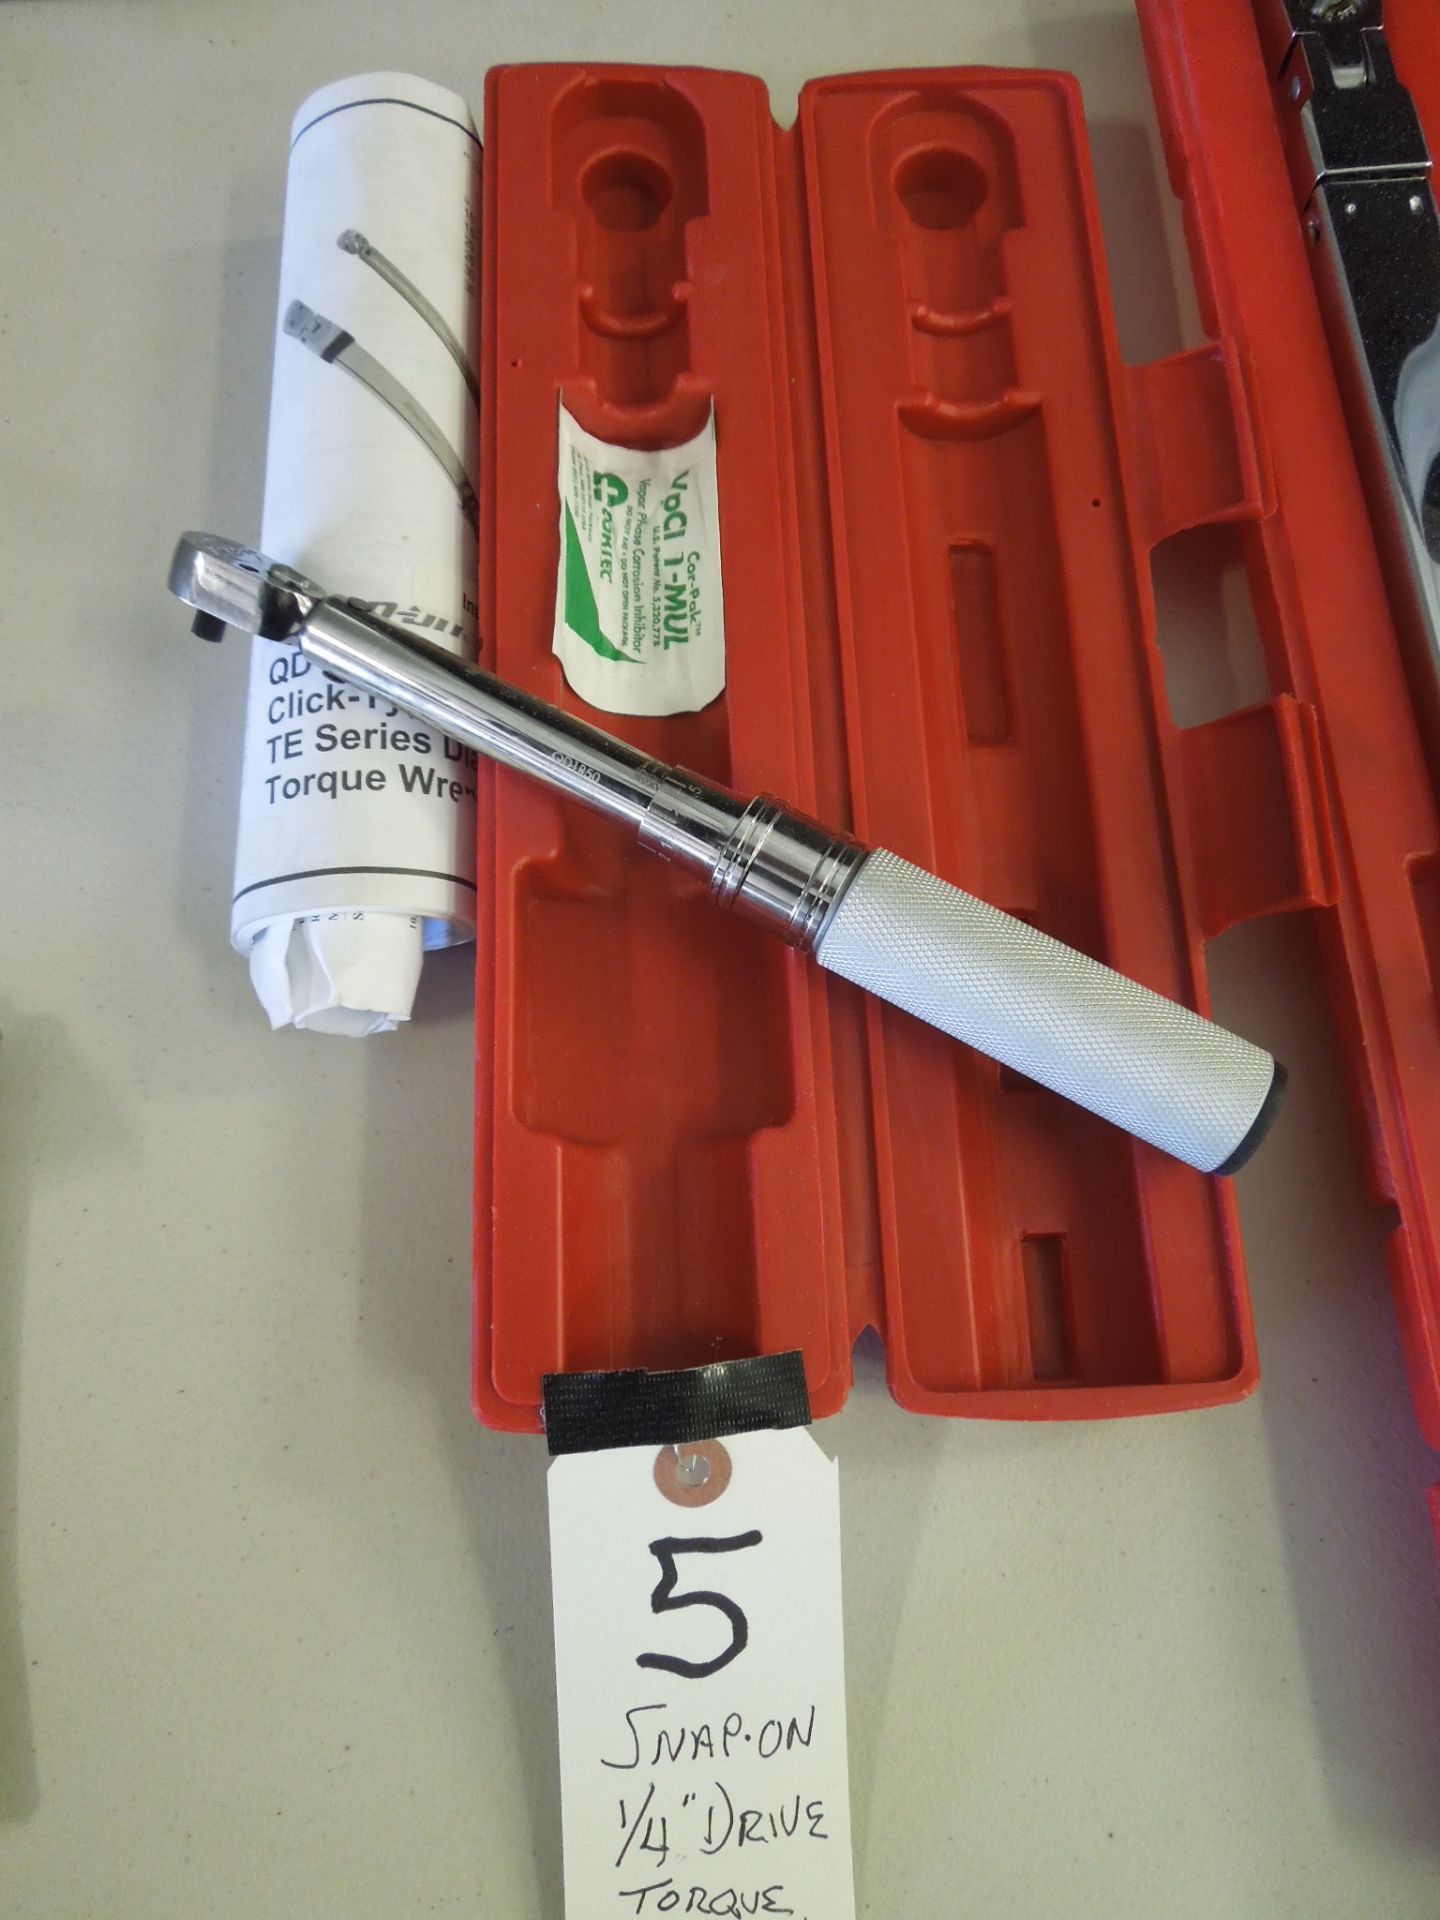 Snap-on 1/4" Drive Torque Wrench